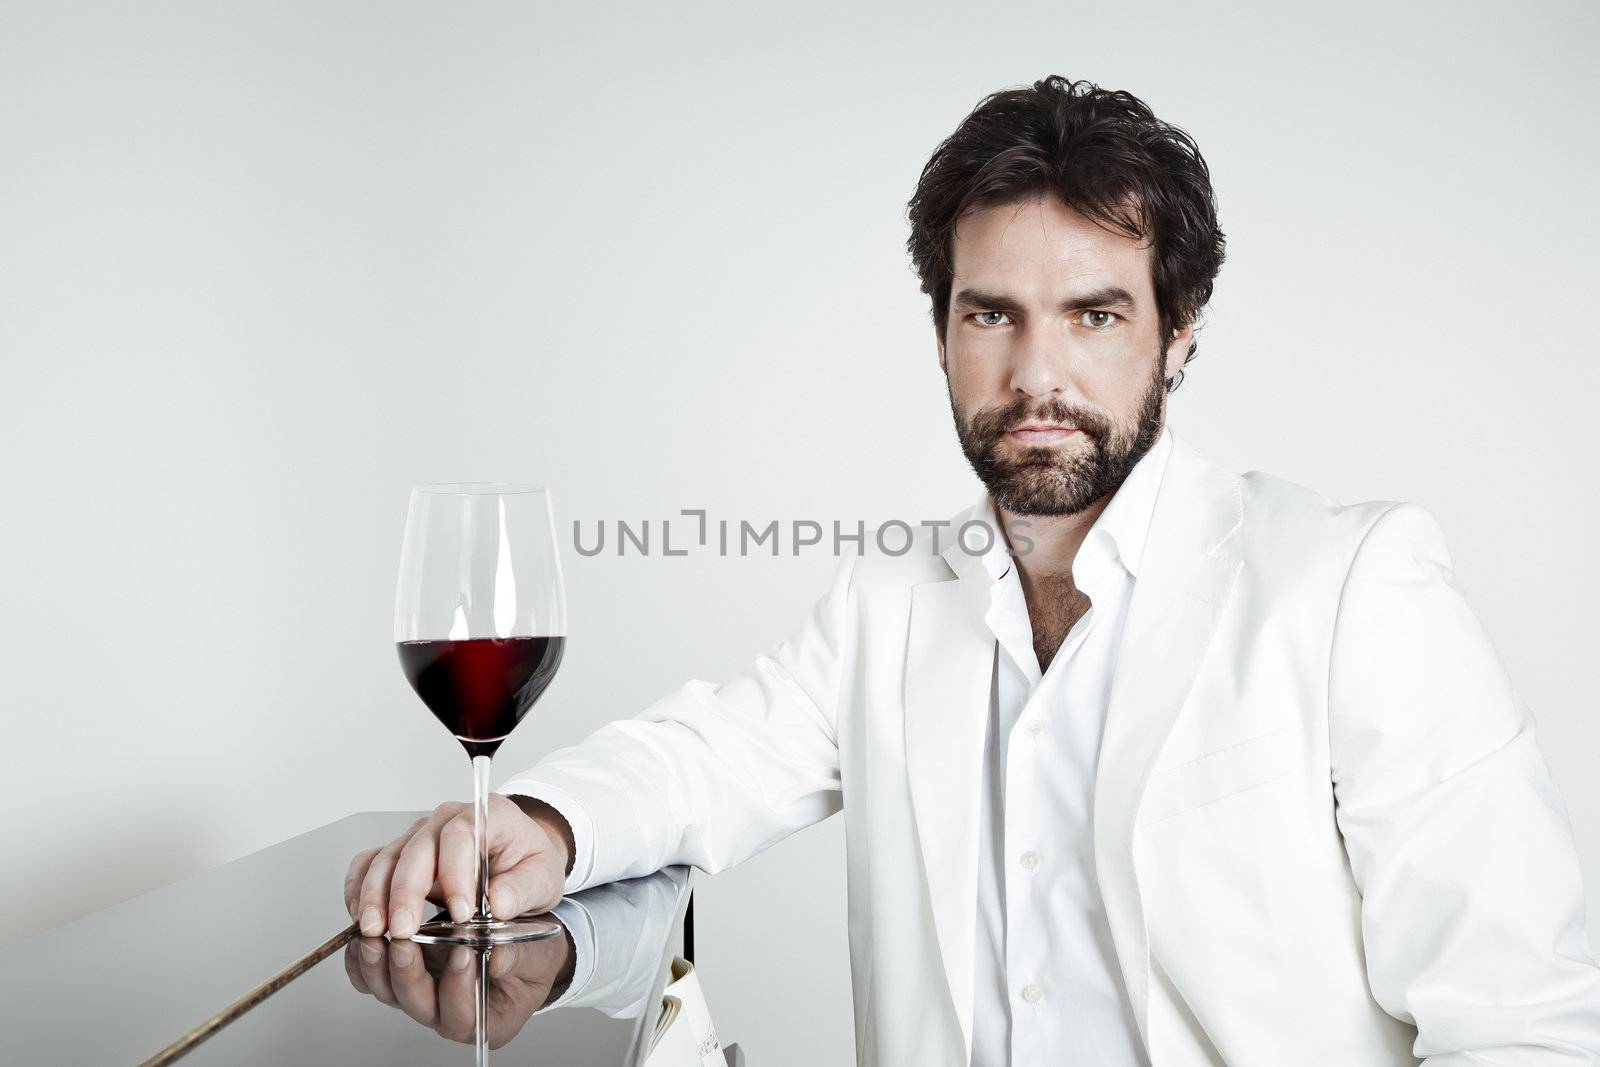 An image of a handsome man and a glass of red wine